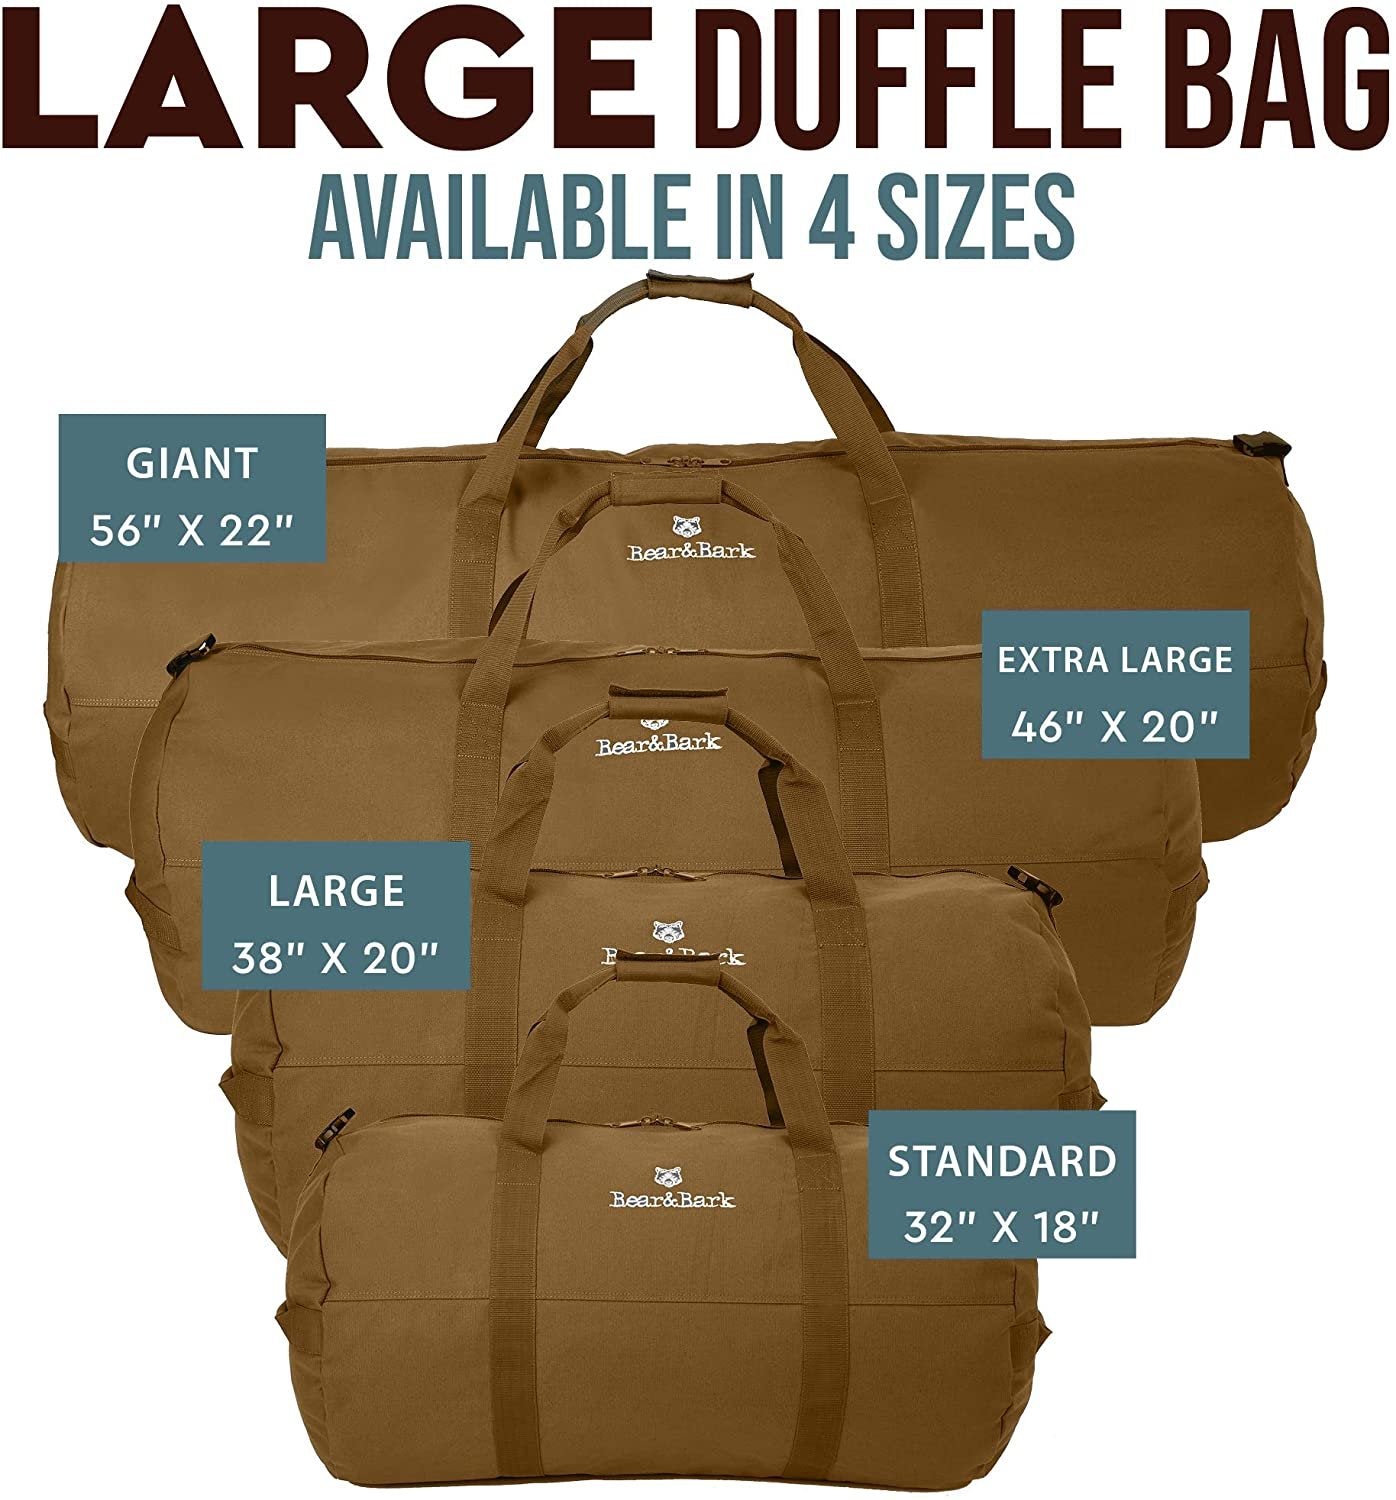 Blue Military Canvas Duffel Bag - Giant 56x22 - Army Style Carryall for Men/Women